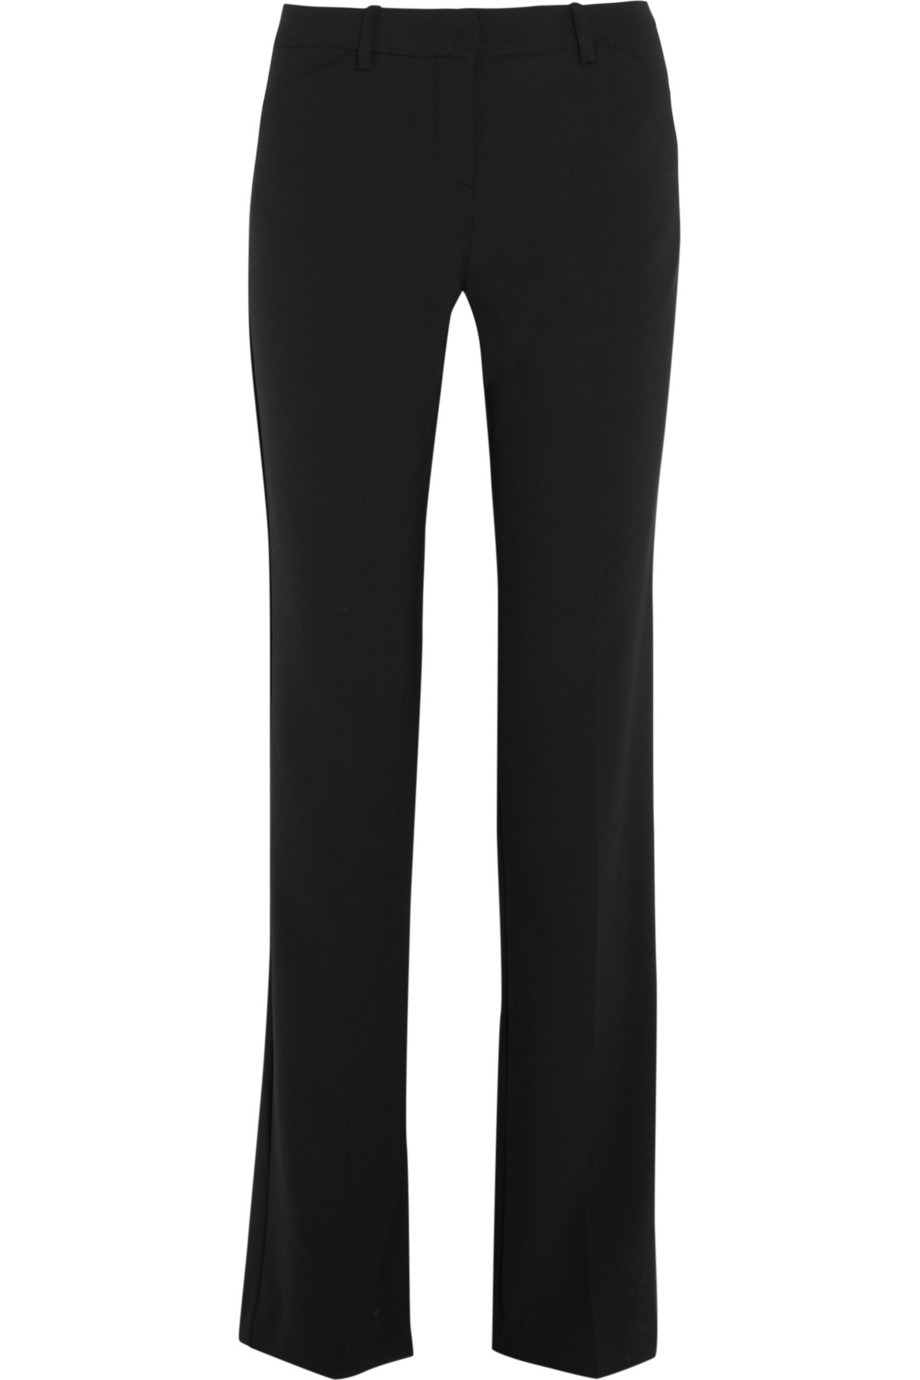 Theory Stretch Bootcut Pants in Black | Lyst